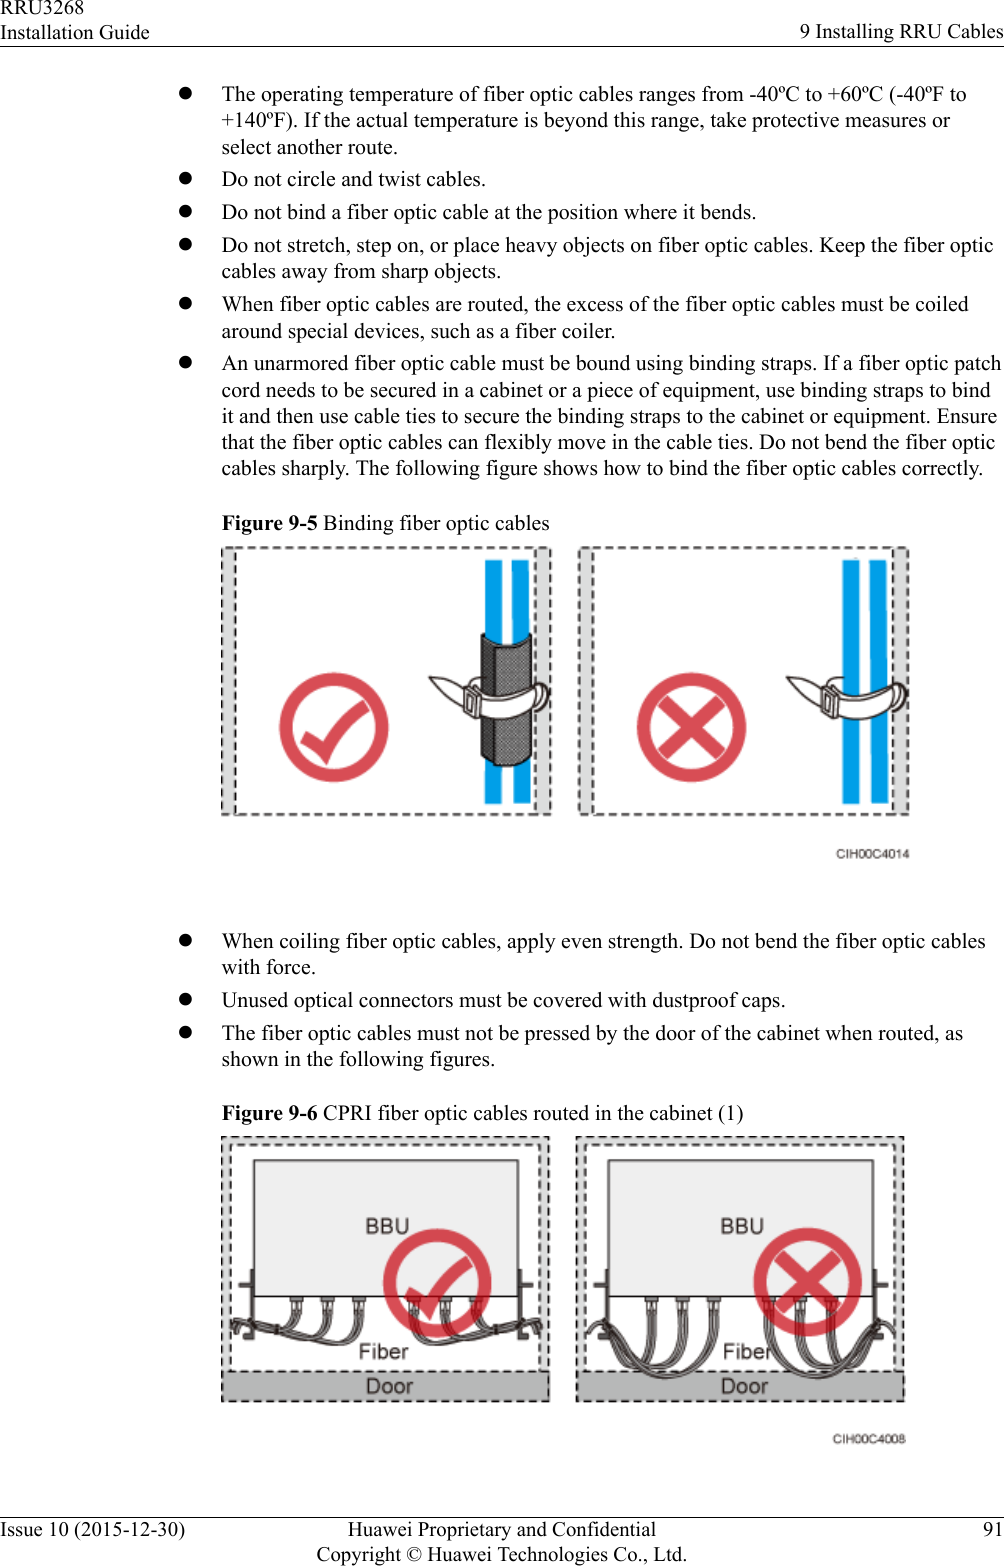 lThe operating temperature of fiber optic cables ranges from -40ºC to +60ºC (-40ºF to+140ºF). If the actual temperature is beyond this range, take protective measures orselect another route.lDo not circle and twist cables.lDo not bind a fiber optic cable at the position where it bends.lDo not stretch, step on, or place heavy objects on fiber optic cables. Keep the fiber opticcables away from sharp objects.lWhen fiber optic cables are routed, the excess of the fiber optic cables must be coiledaround special devices, such as a fiber coiler.lAn unarmored fiber optic cable must be bound using binding straps. If a fiber optic patchcord needs to be secured in a cabinet or a piece of equipment, use binding straps to bindit and then use cable ties to secure the binding straps to the cabinet or equipment. Ensurethat the fiber optic cables can flexibly move in the cable ties. Do not bend the fiber opticcables sharply. The following figure shows how to bind the fiber optic cables correctly.Figure 9-5 Binding fiber optic cables lWhen coiling fiber optic cables, apply even strength. Do not bend the fiber optic cableswith force.lUnused optical connectors must be covered with dustproof caps.lThe fiber optic cables must not be pressed by the door of the cabinet when routed, asshown in the following figures.Figure 9-6 CPRI fiber optic cables routed in the cabinet (1)RRU3268Installation Guide 9 Installing RRU CablesIssue 10 (2015-12-30) Huawei Proprietary and ConfidentialCopyright © Huawei Technologies Co., Ltd.91